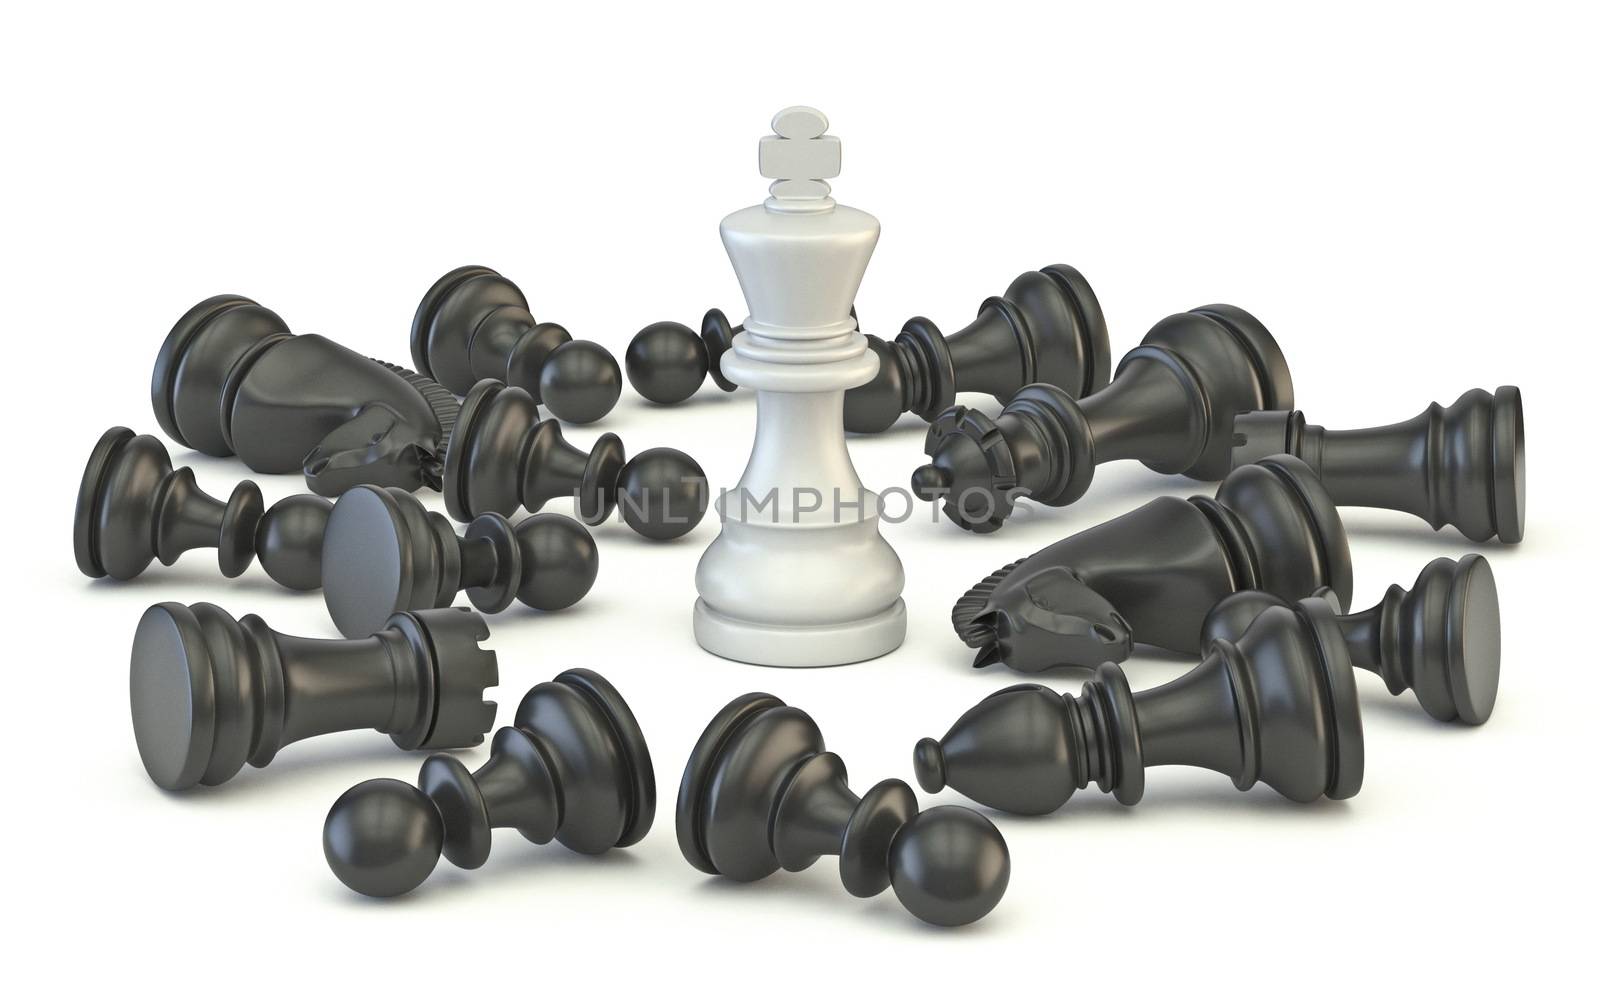 White king standing chess pieces 3D render illustration isolated on white background